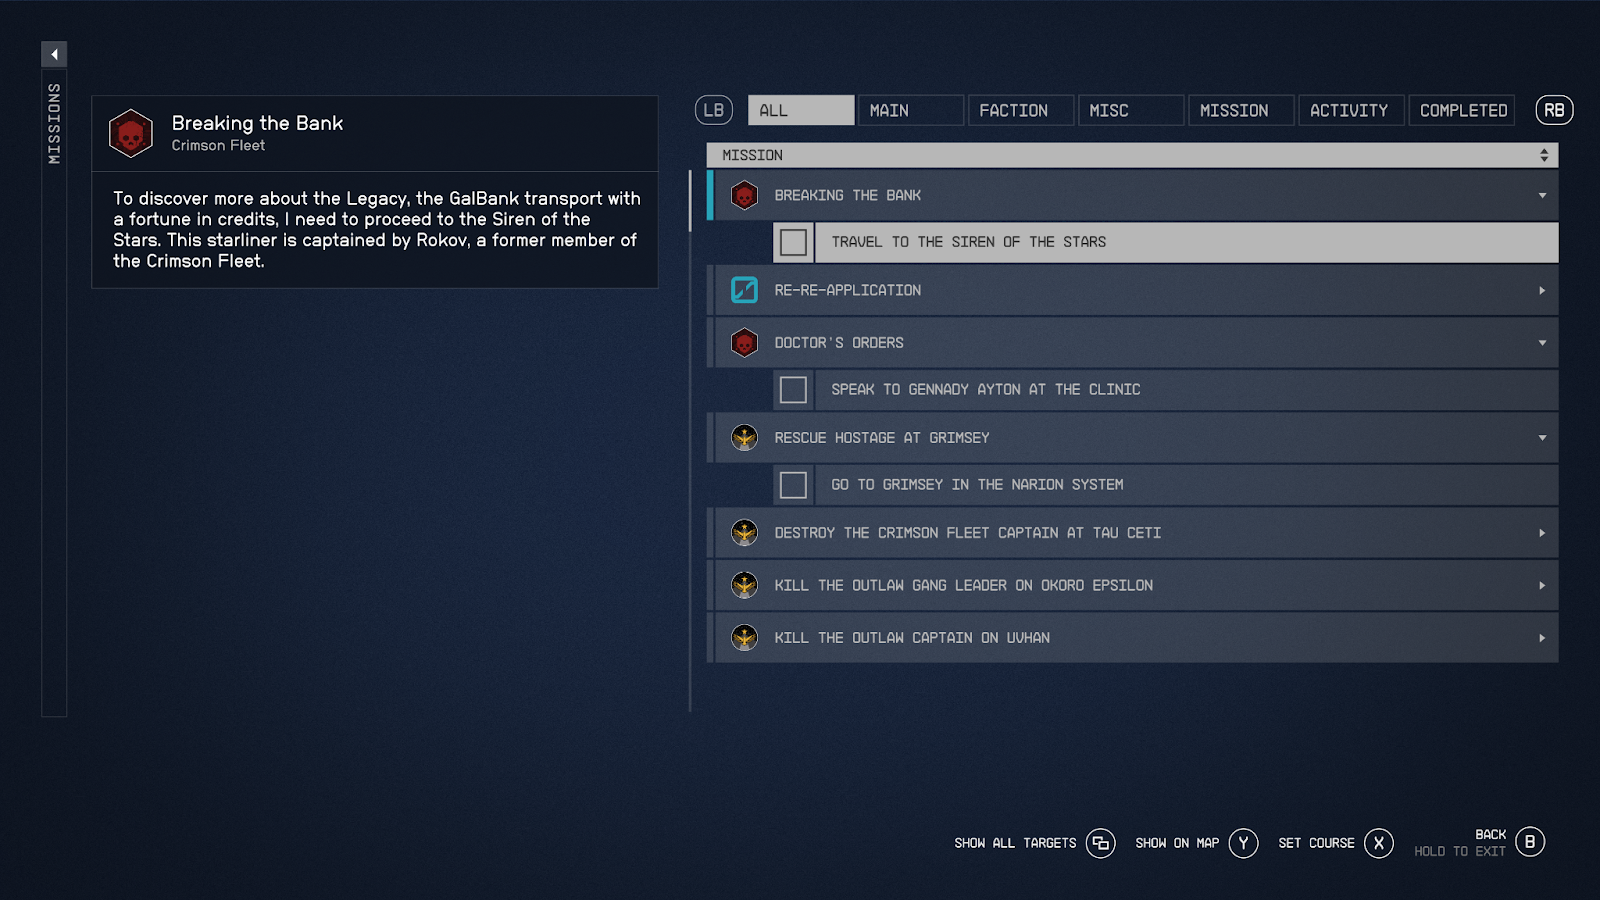 An in game screenshot of the mission menu from the game Starfield.